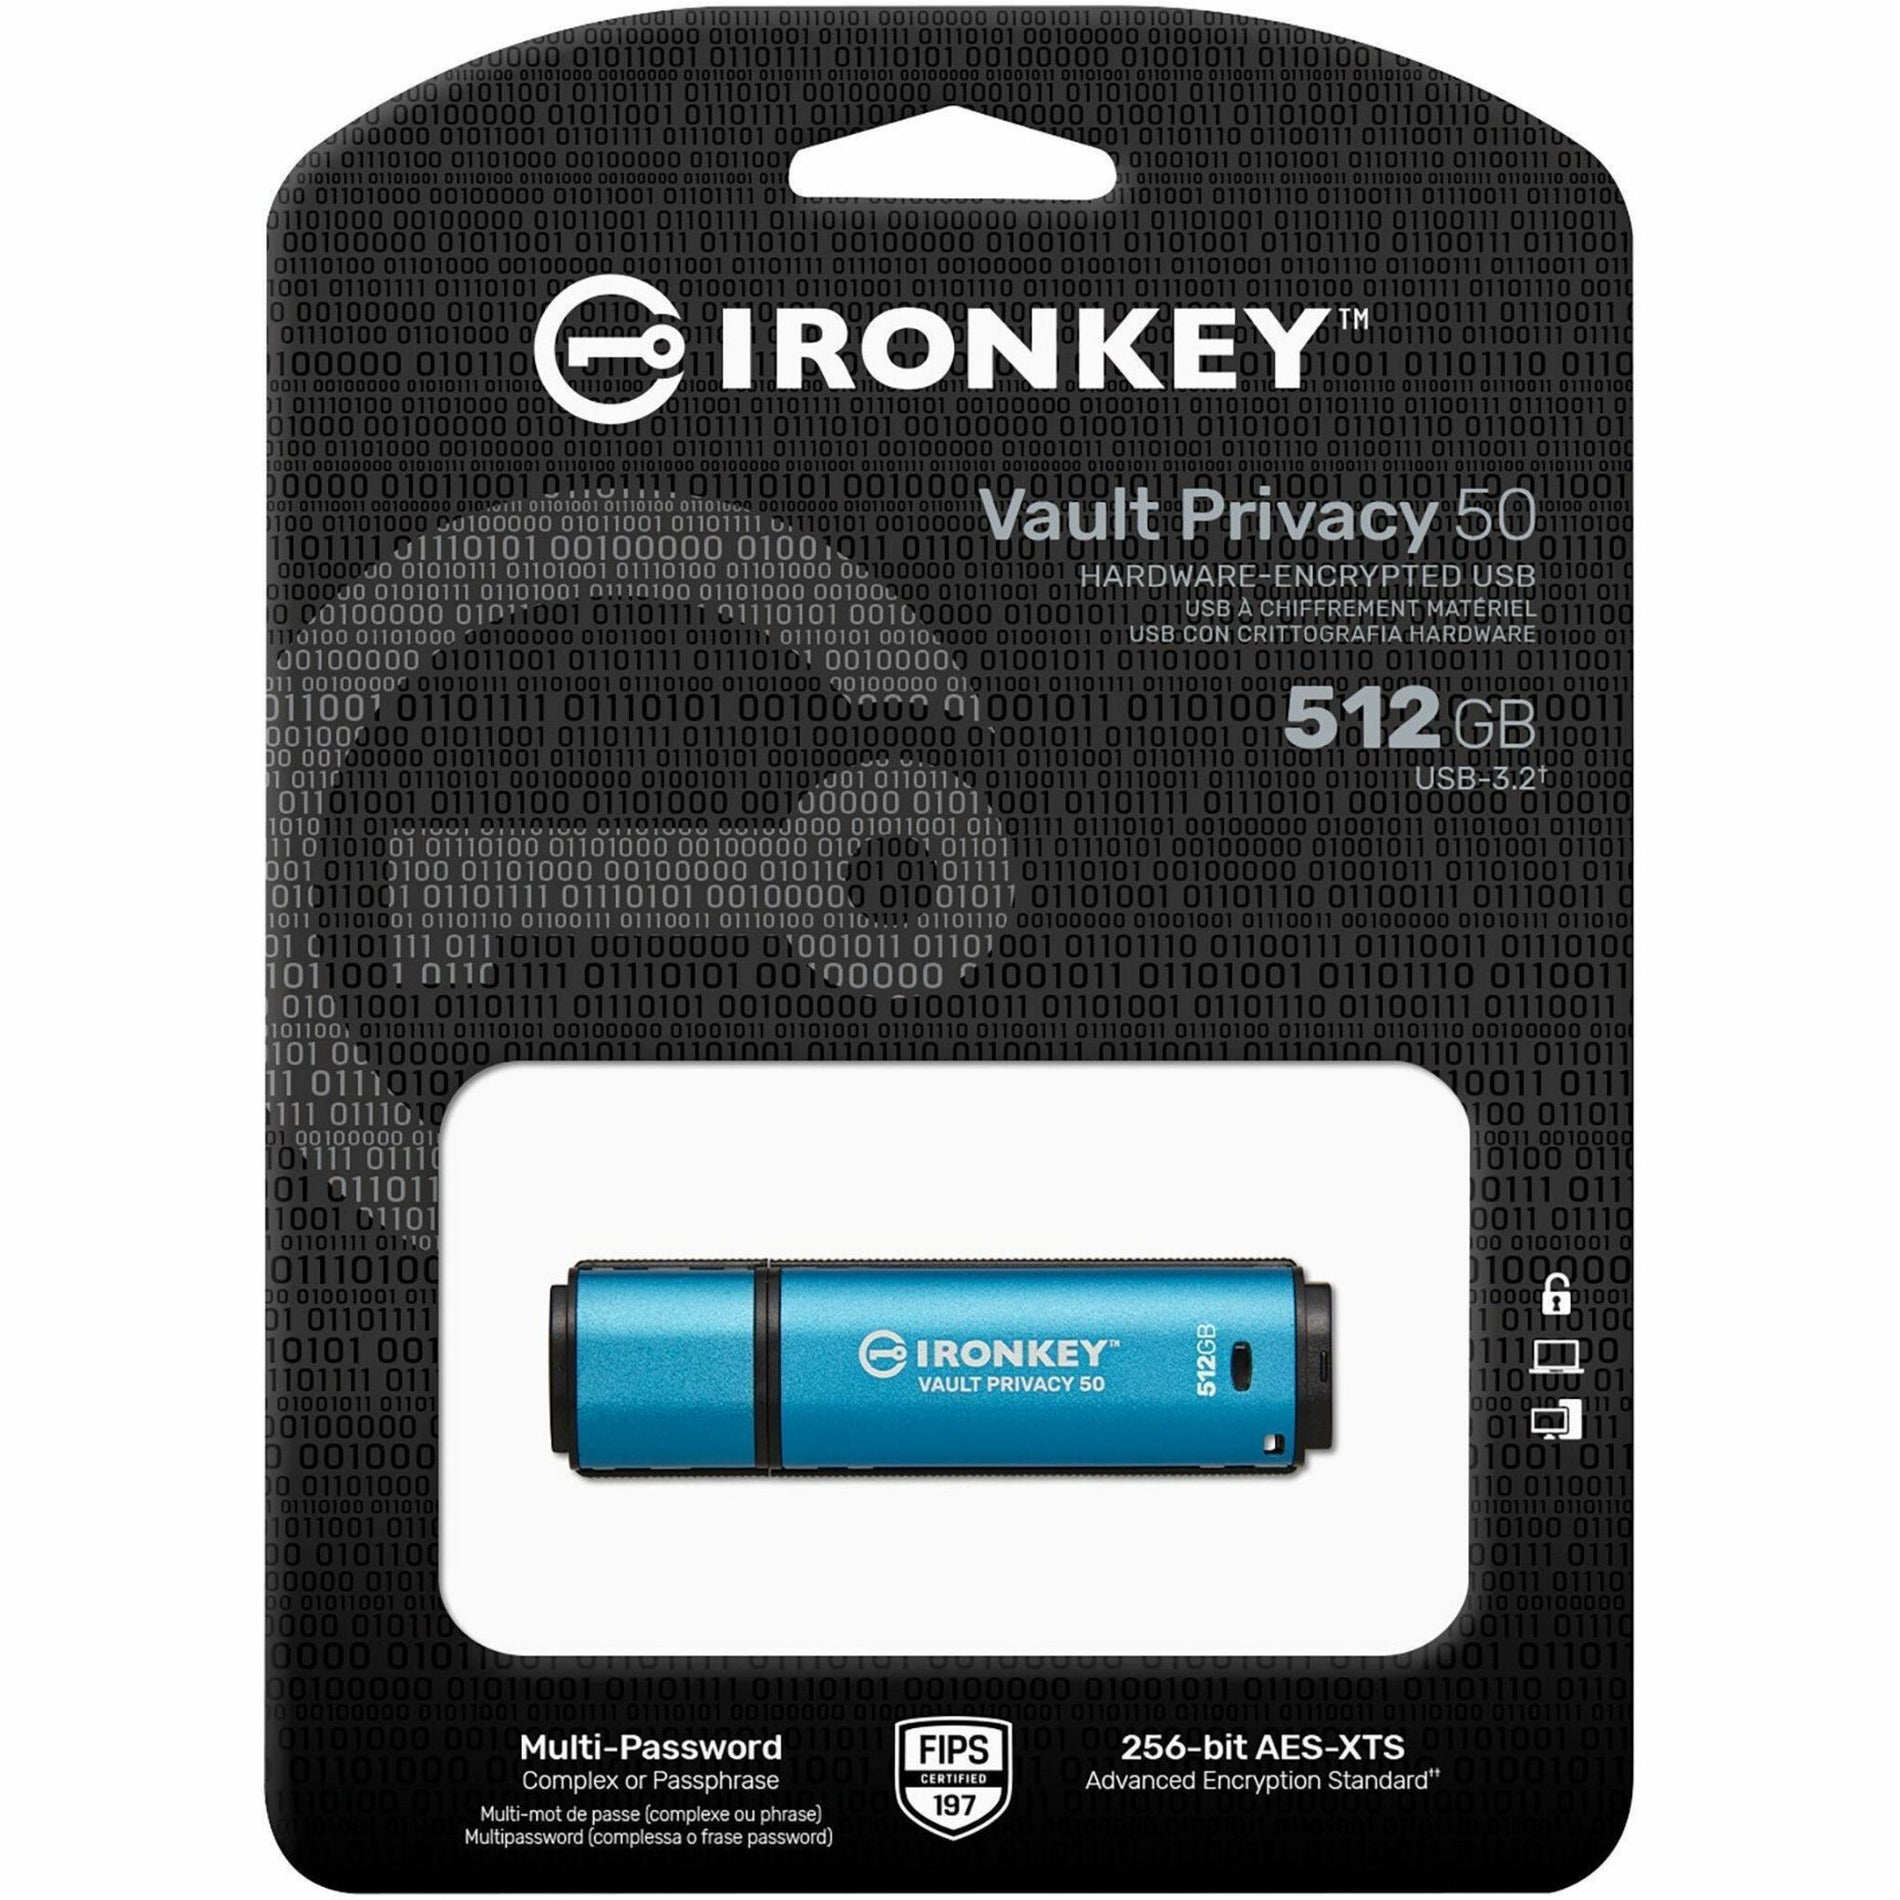 IronKey IKVP50/512GB Vault Privacy 50 Series 512GB USB 3.2 (Gen 1) Type A Flash Drive, Brute Force Self Destruct, Cap, Admin and User Mode, Read-only Mode, Password Protection, Cryptographic Erase, Water Proof